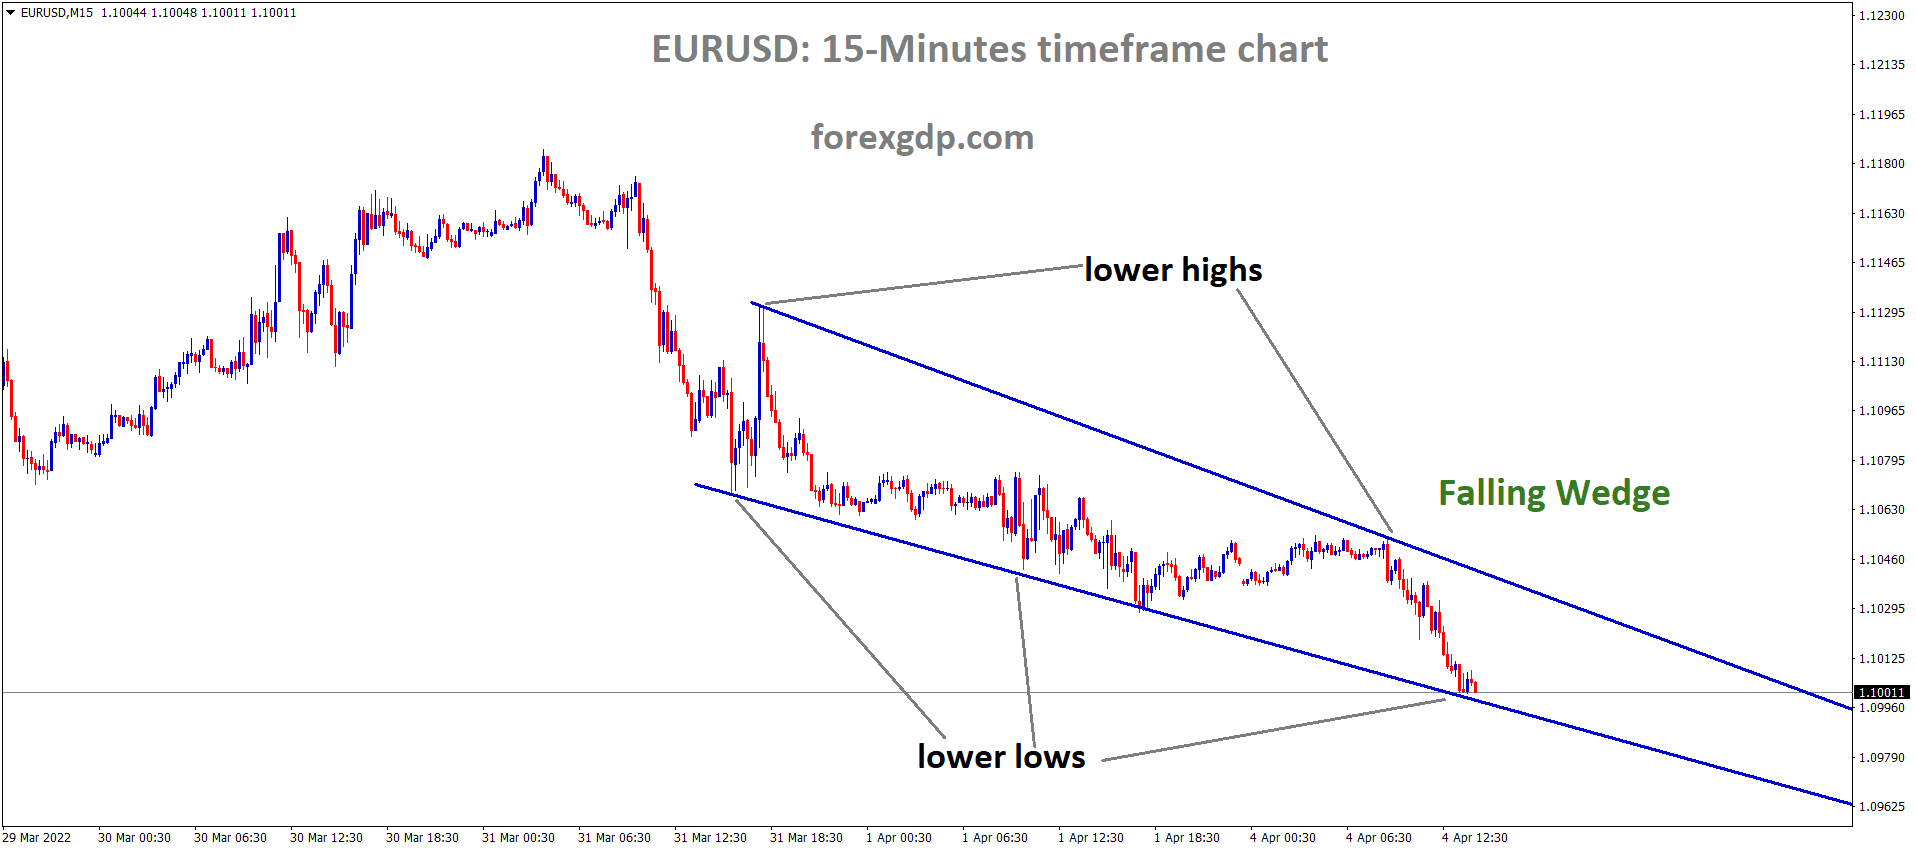 EURUSD M15 time Frame Market has reached the lower low area of the Falling Wedge Pattern.